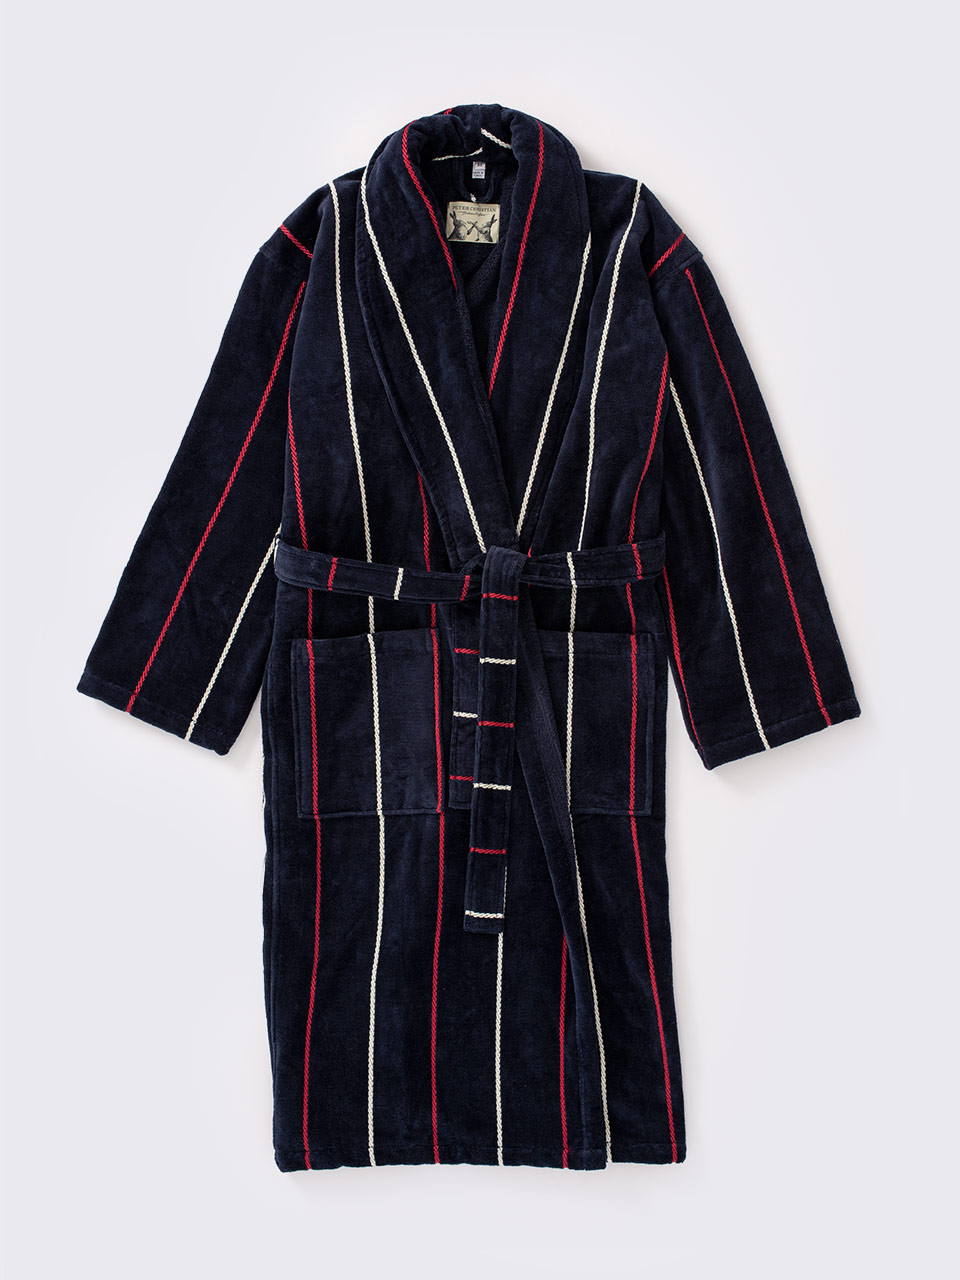 Men's Luxury Navy and Red Striped Velour Dressing Gown | Peter Christian